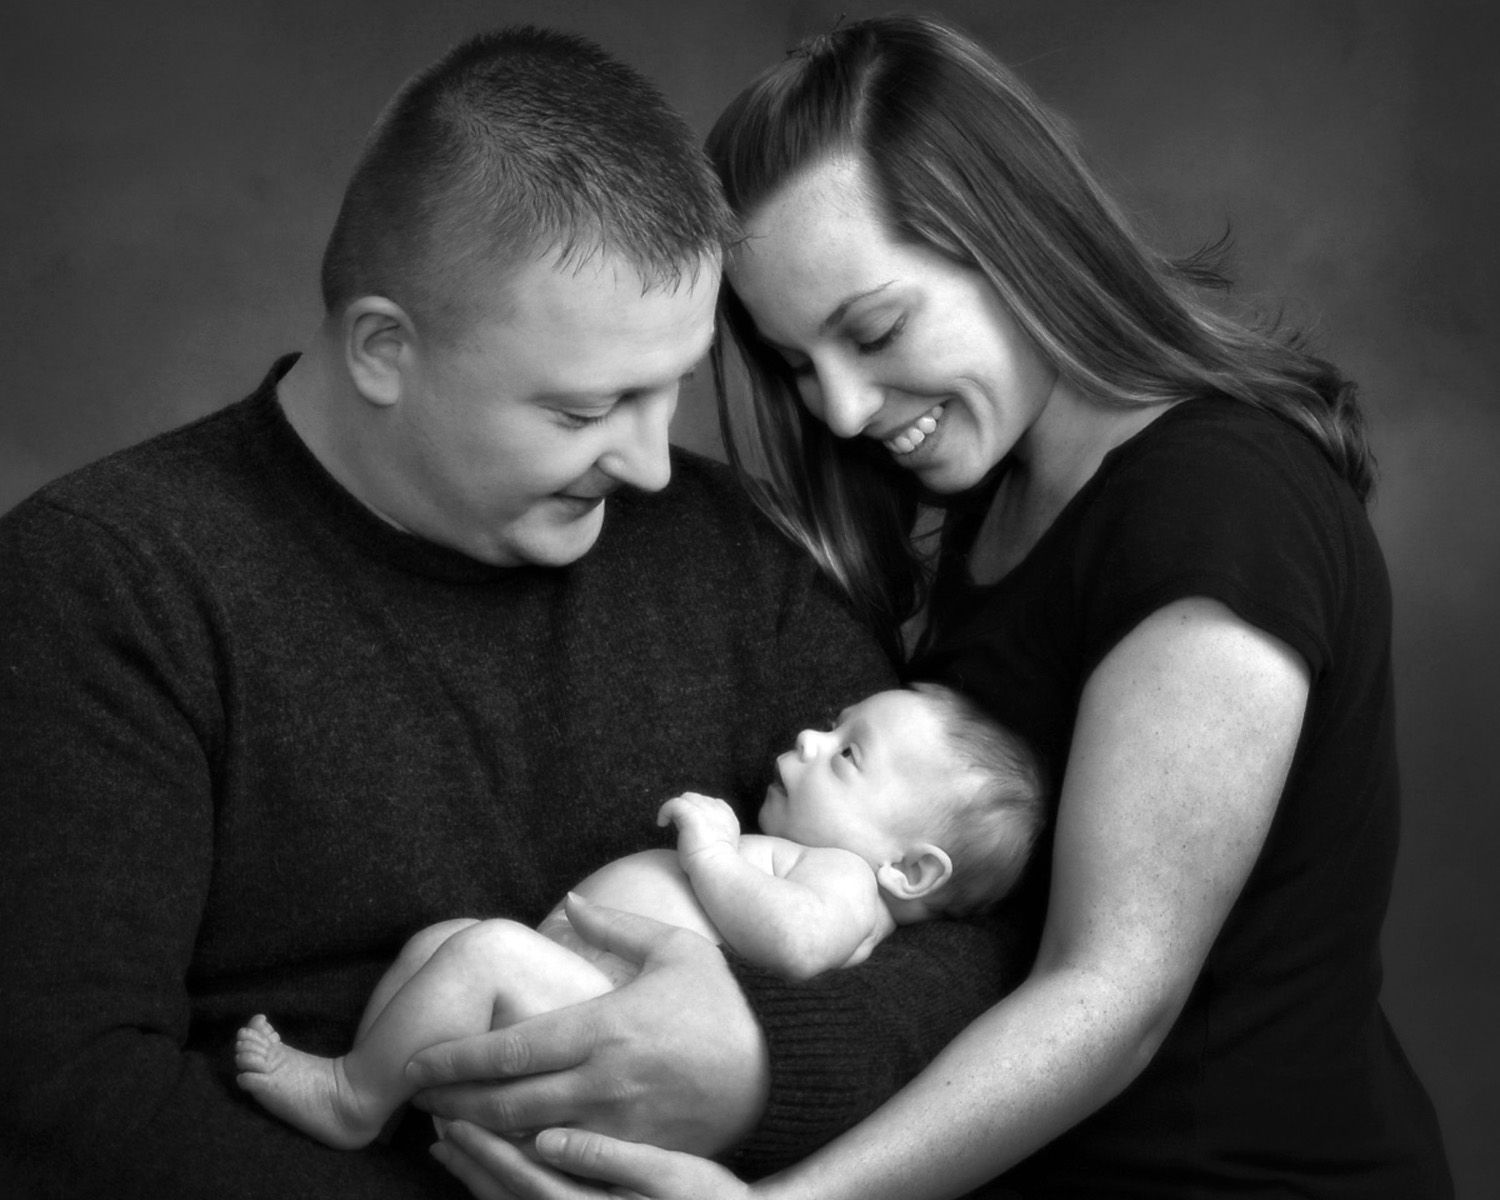 mom dad and baby wallpaper,photograph,people,child,photography,black and white